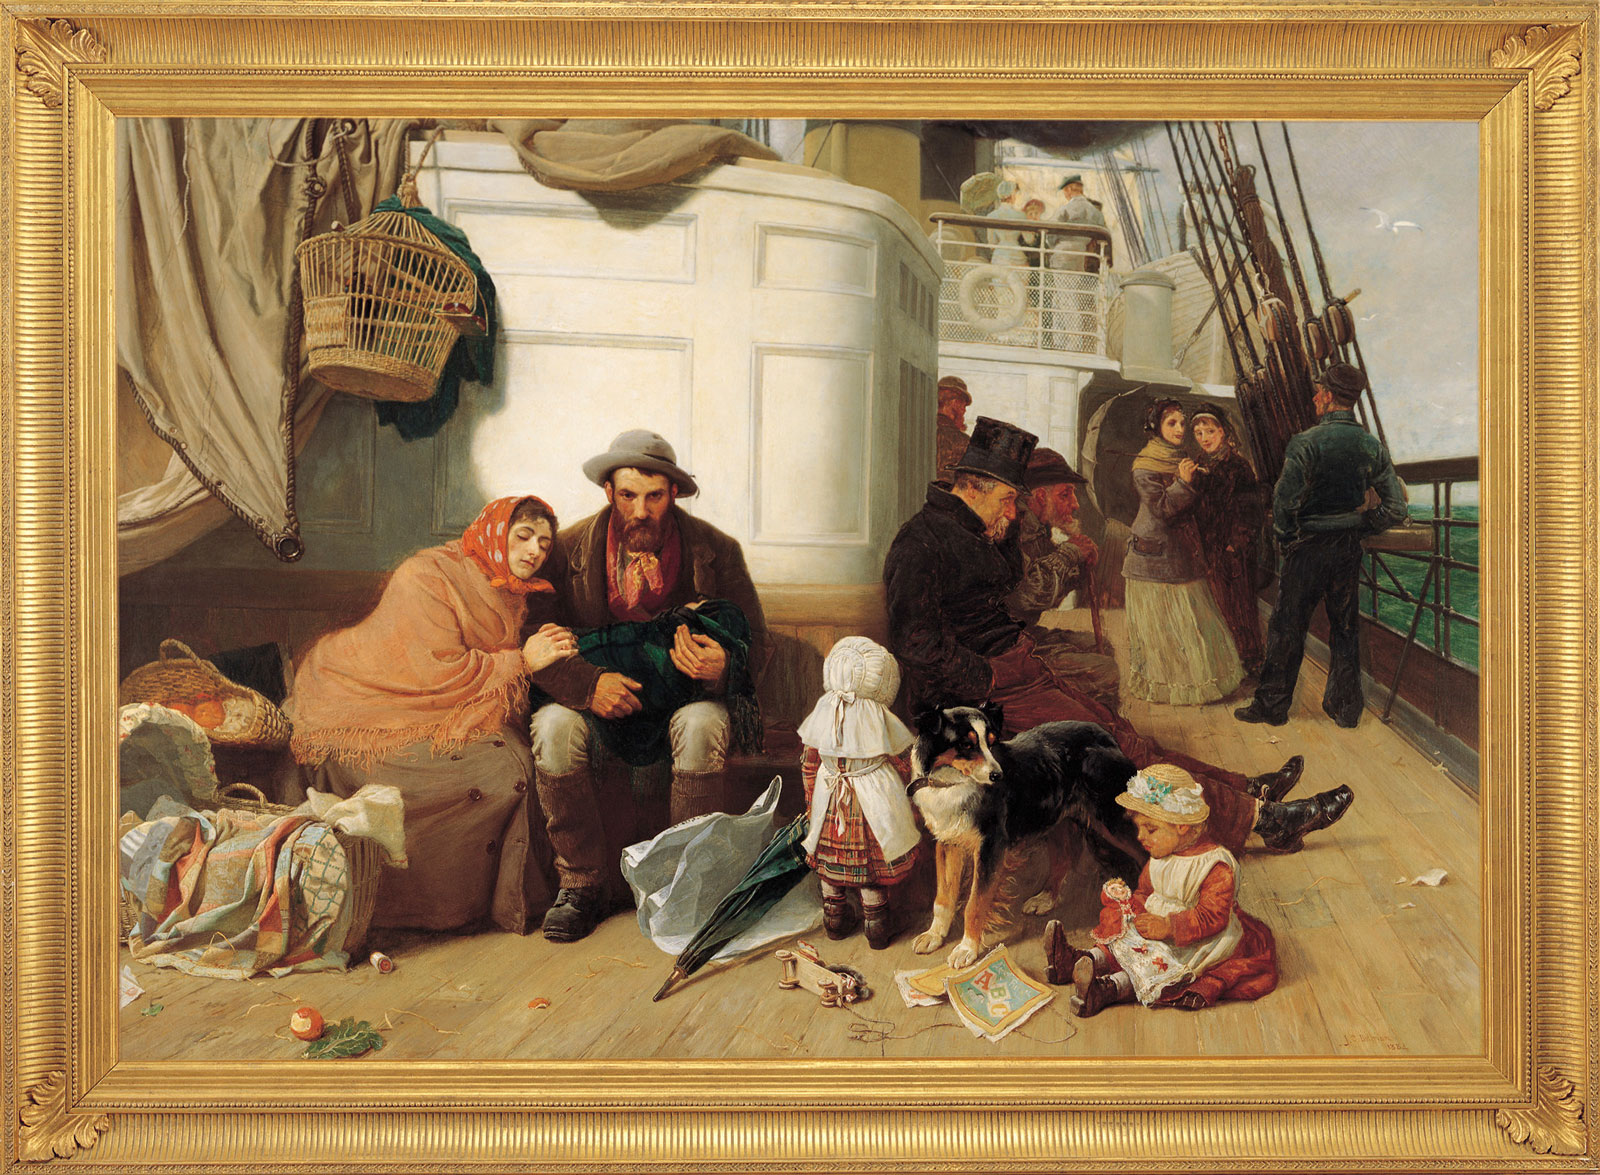 The Immigrants’ Ship by John Charles Dollman, 1884